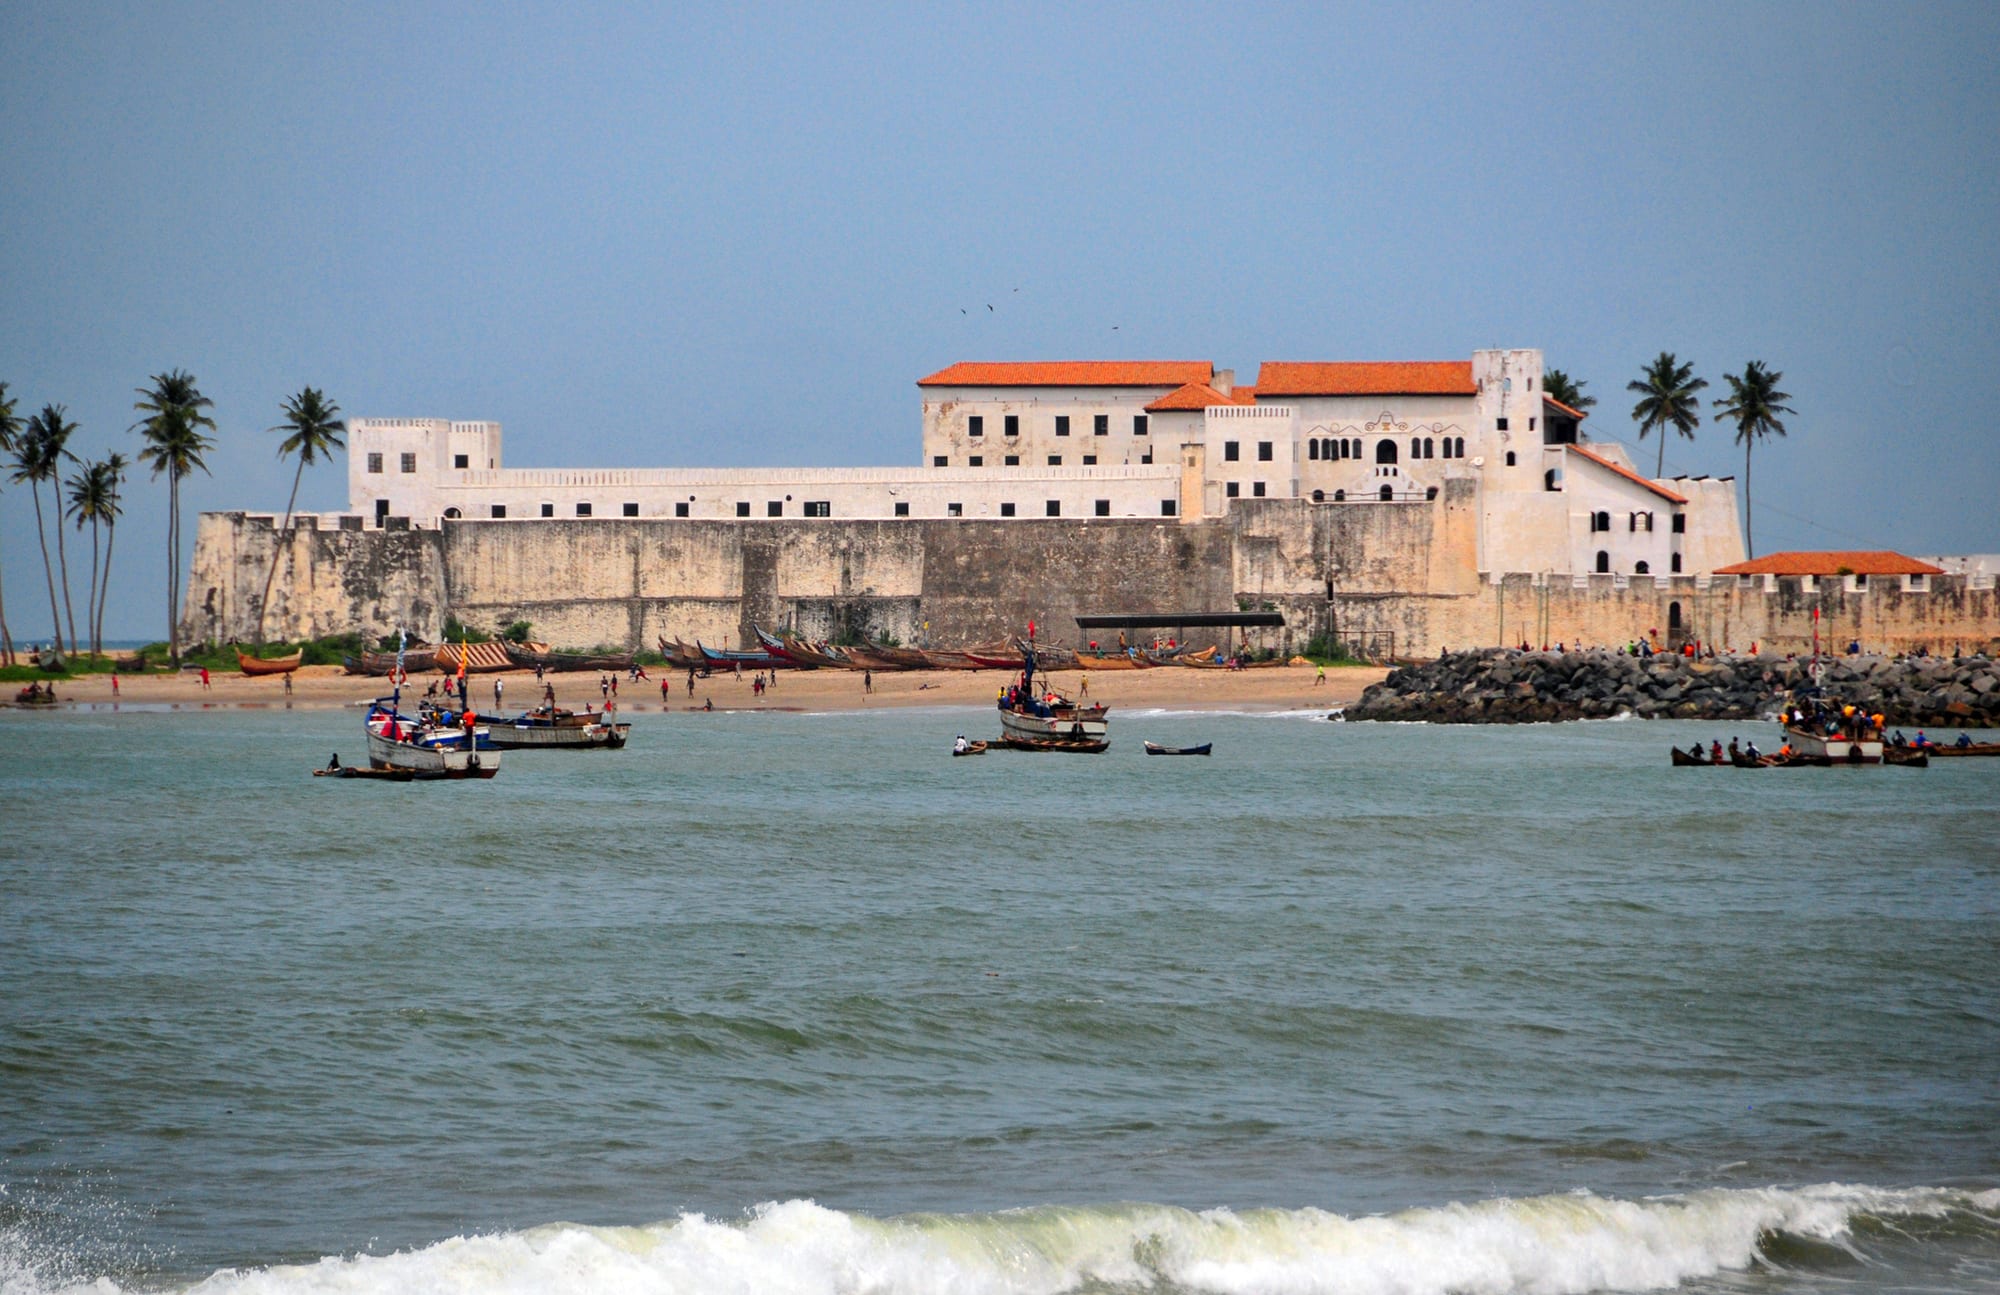 Elmina Castle and Fortress in Ghana